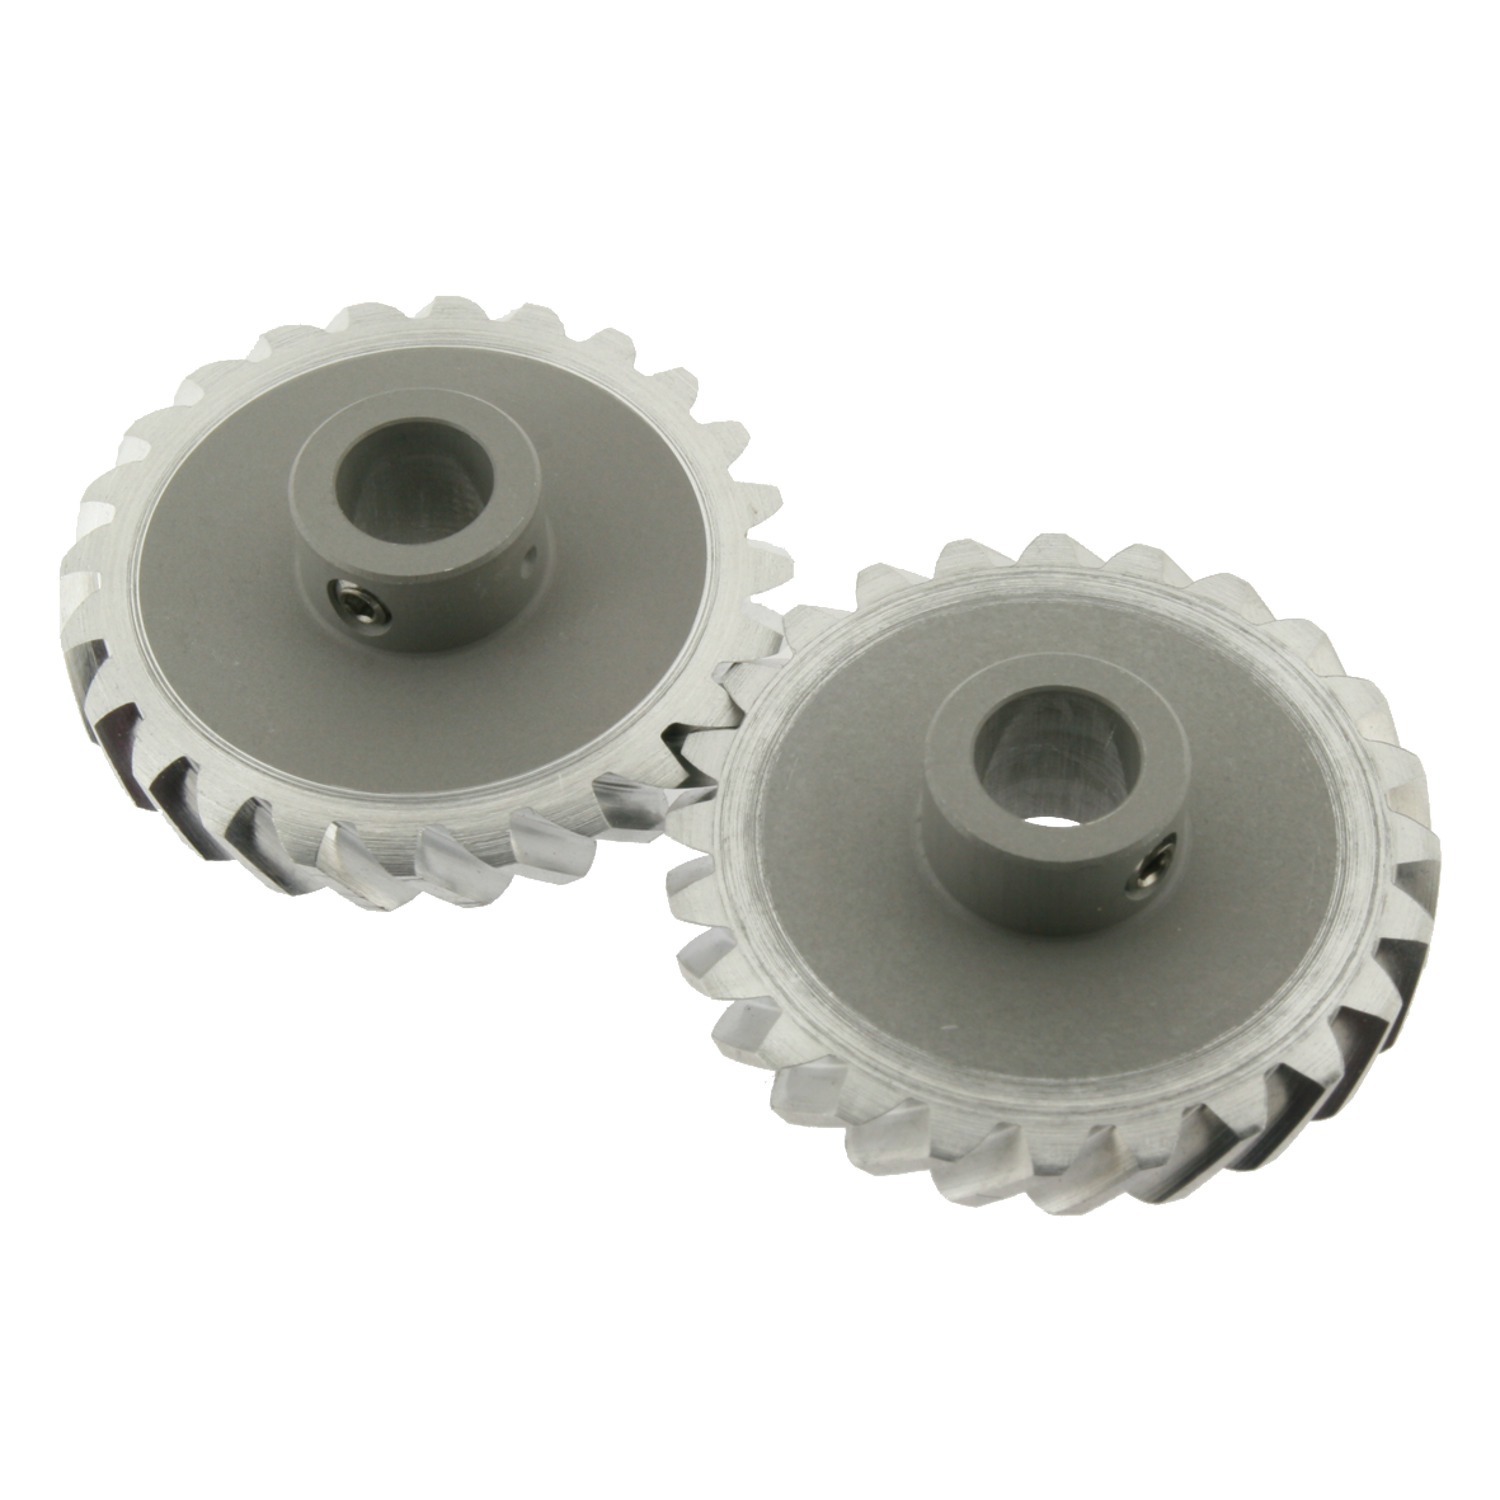 Product R2156, 1,0 Module Helical Gears stainless steel or aluminium, pin hub / 